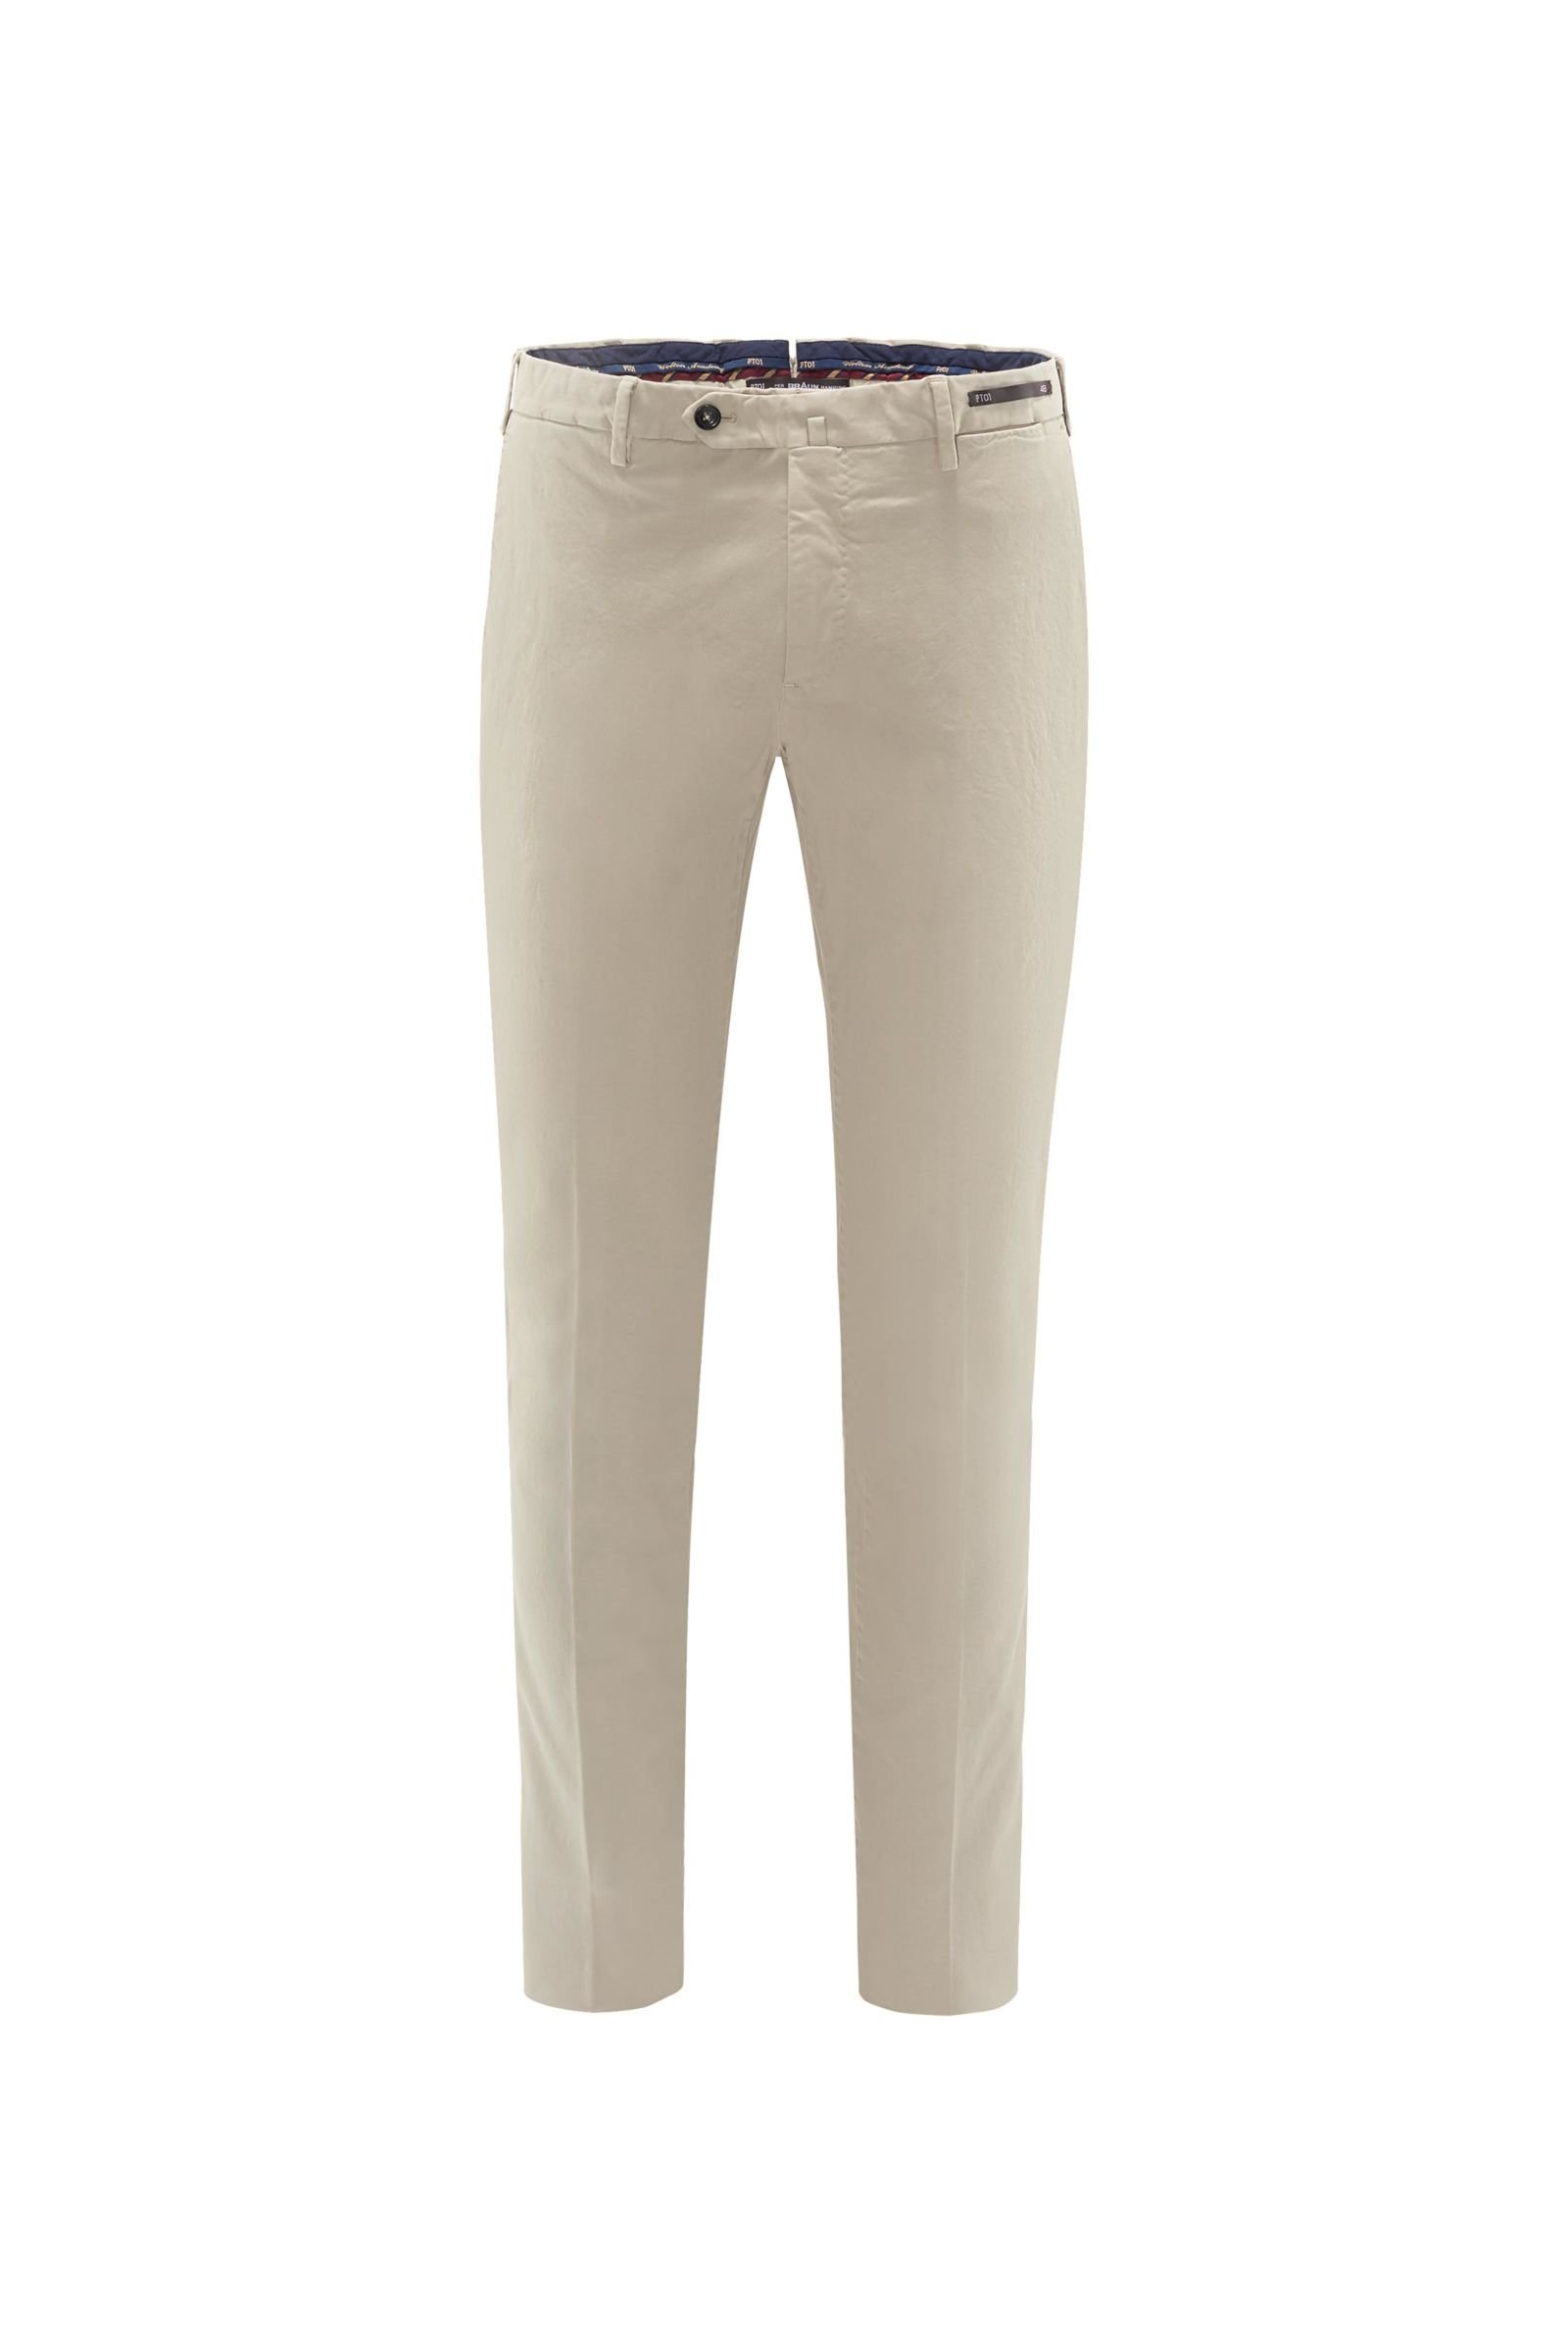 Cotton trousers 'Welton Academy Evo Fit' beige